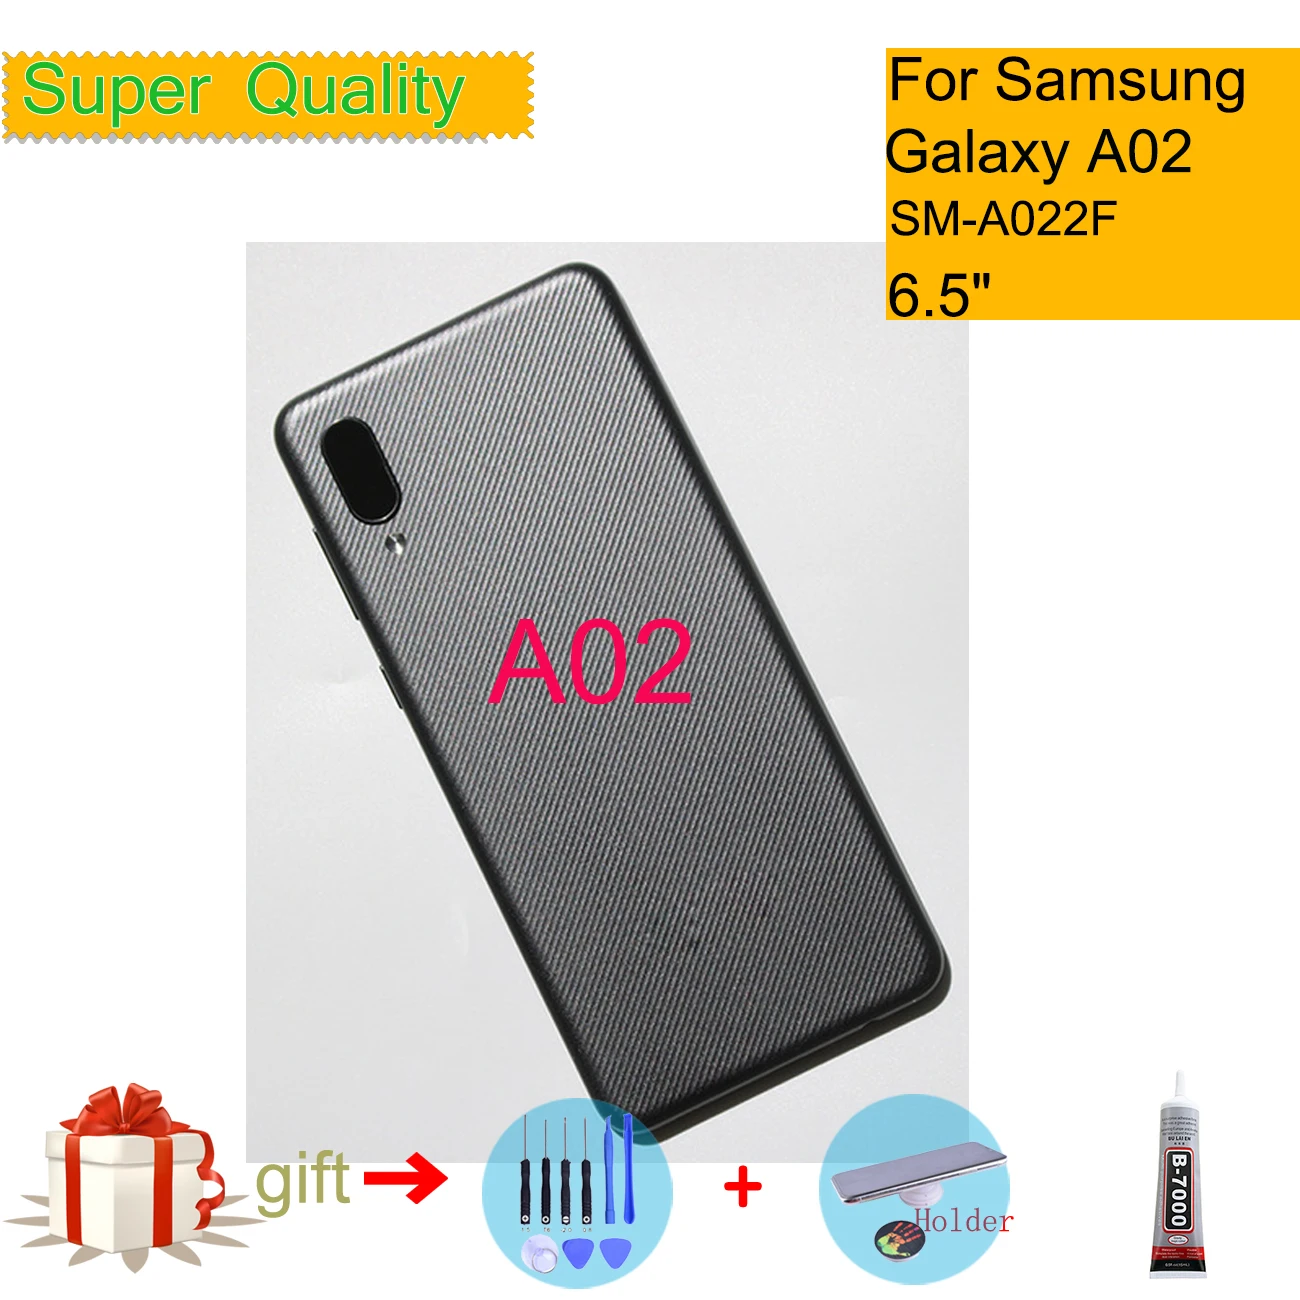 For Samsung Galaxy A02 A022 A022F SM-A022F Housing Back Cover Case Rear Battery Door Chassis Housing Replacement back housing for iphone 5 5s back battery cover housing case for iphone se middle chassis body replacement camera lens imei